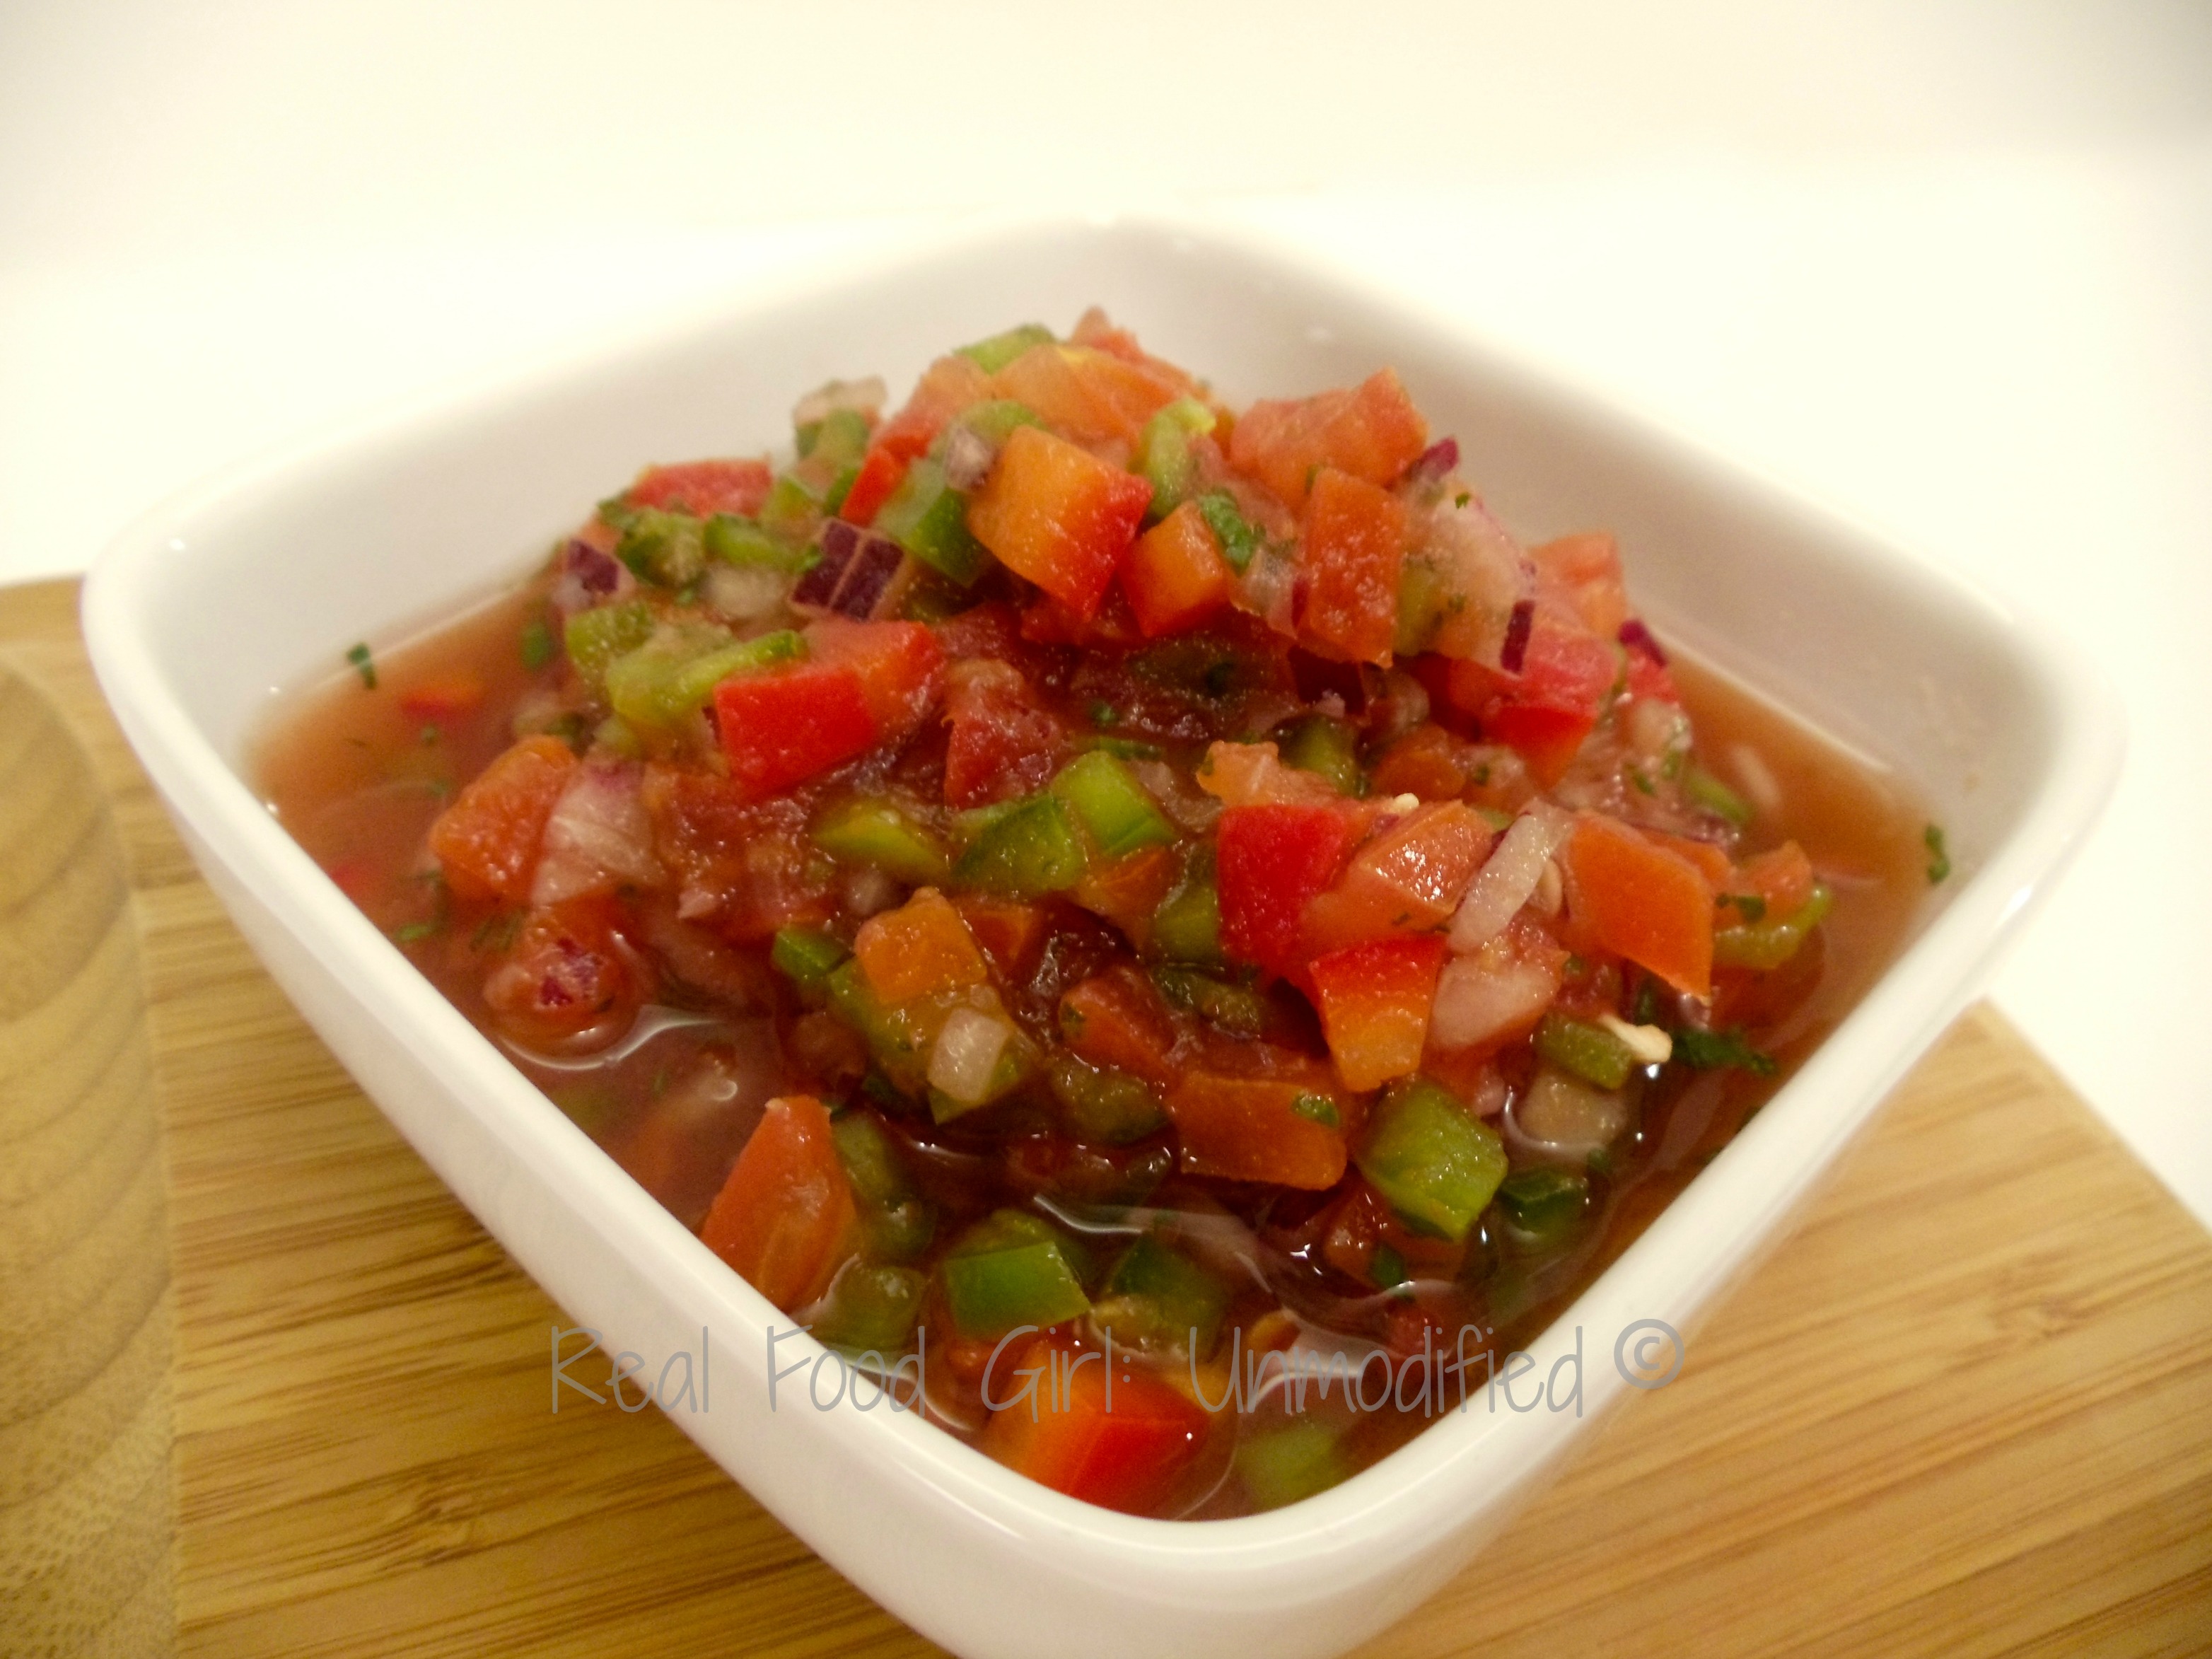 Garden Fresh Organic Veggies make this salsa flavorful and addictive! Pass the chips please! #Real Food Girl: Unmodified